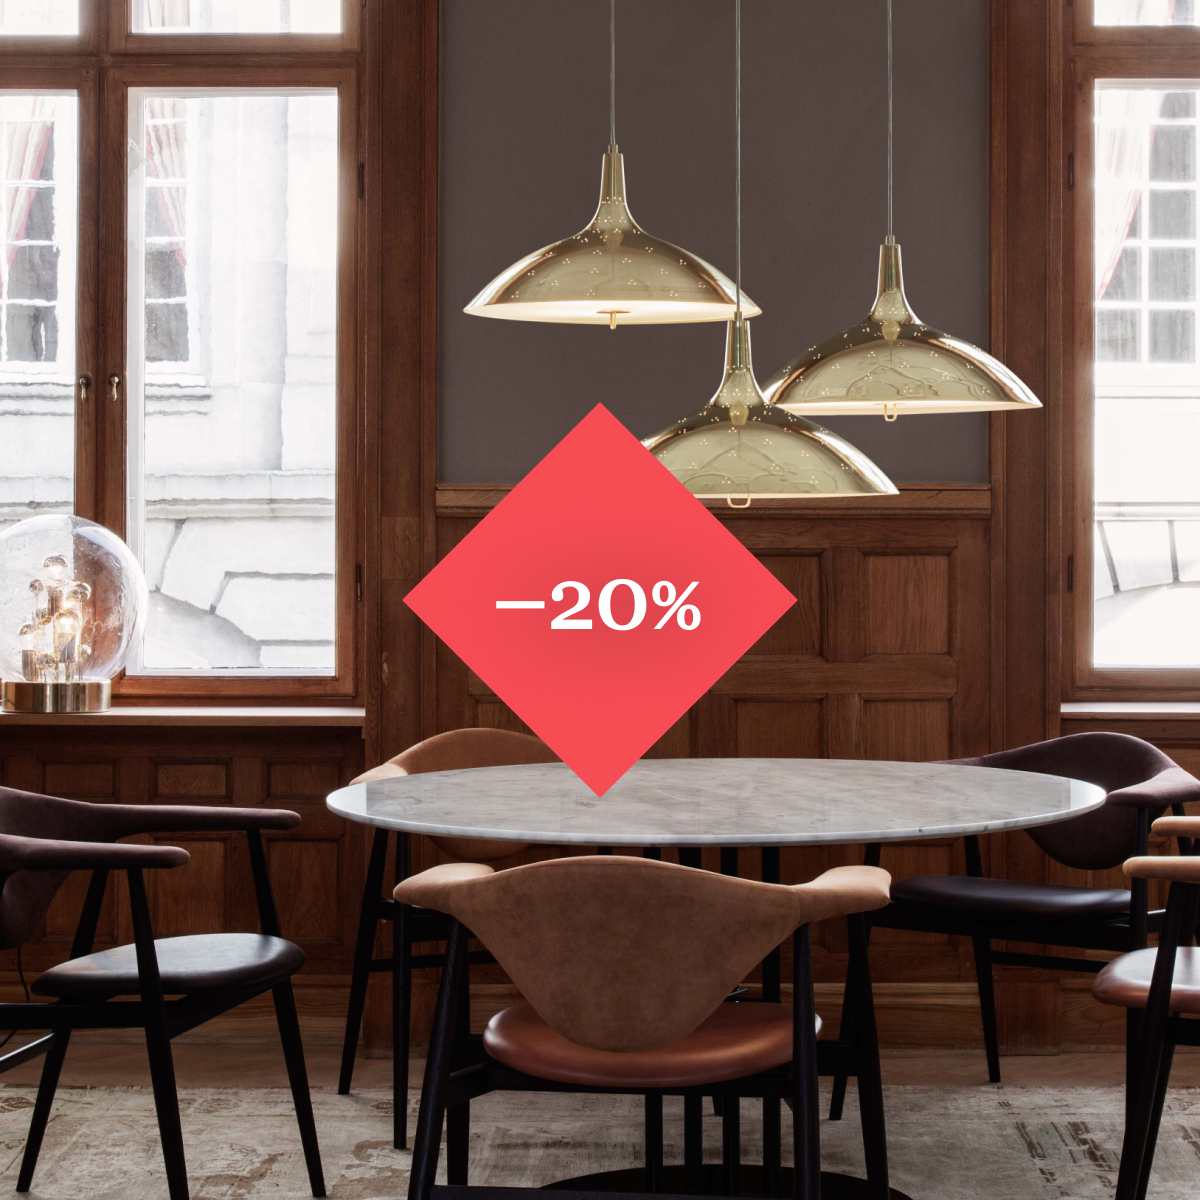 20% off the Tynell lighting collection